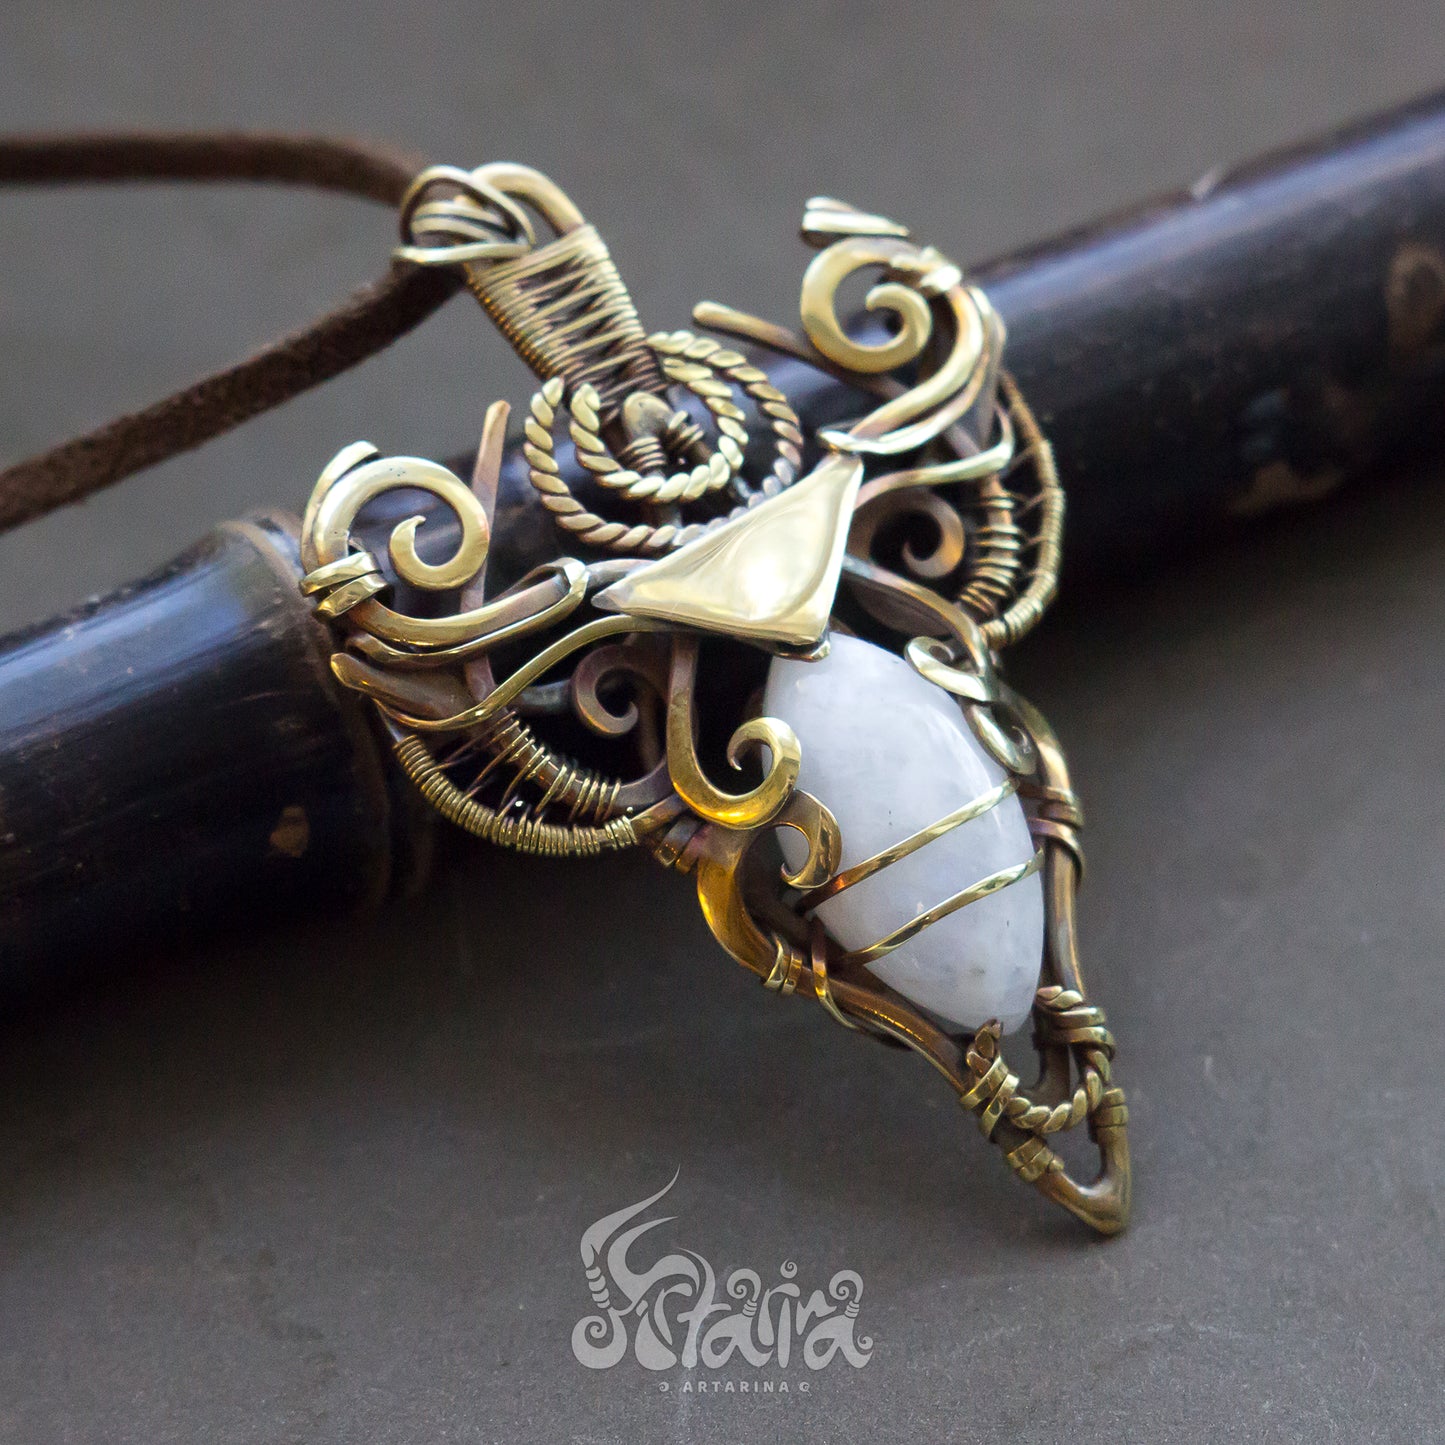 Brass Wire Wrapped Gemstone Pendant Golden colored Designer Pendant Gift For Her solid brass metalwork necklace with white moonstone